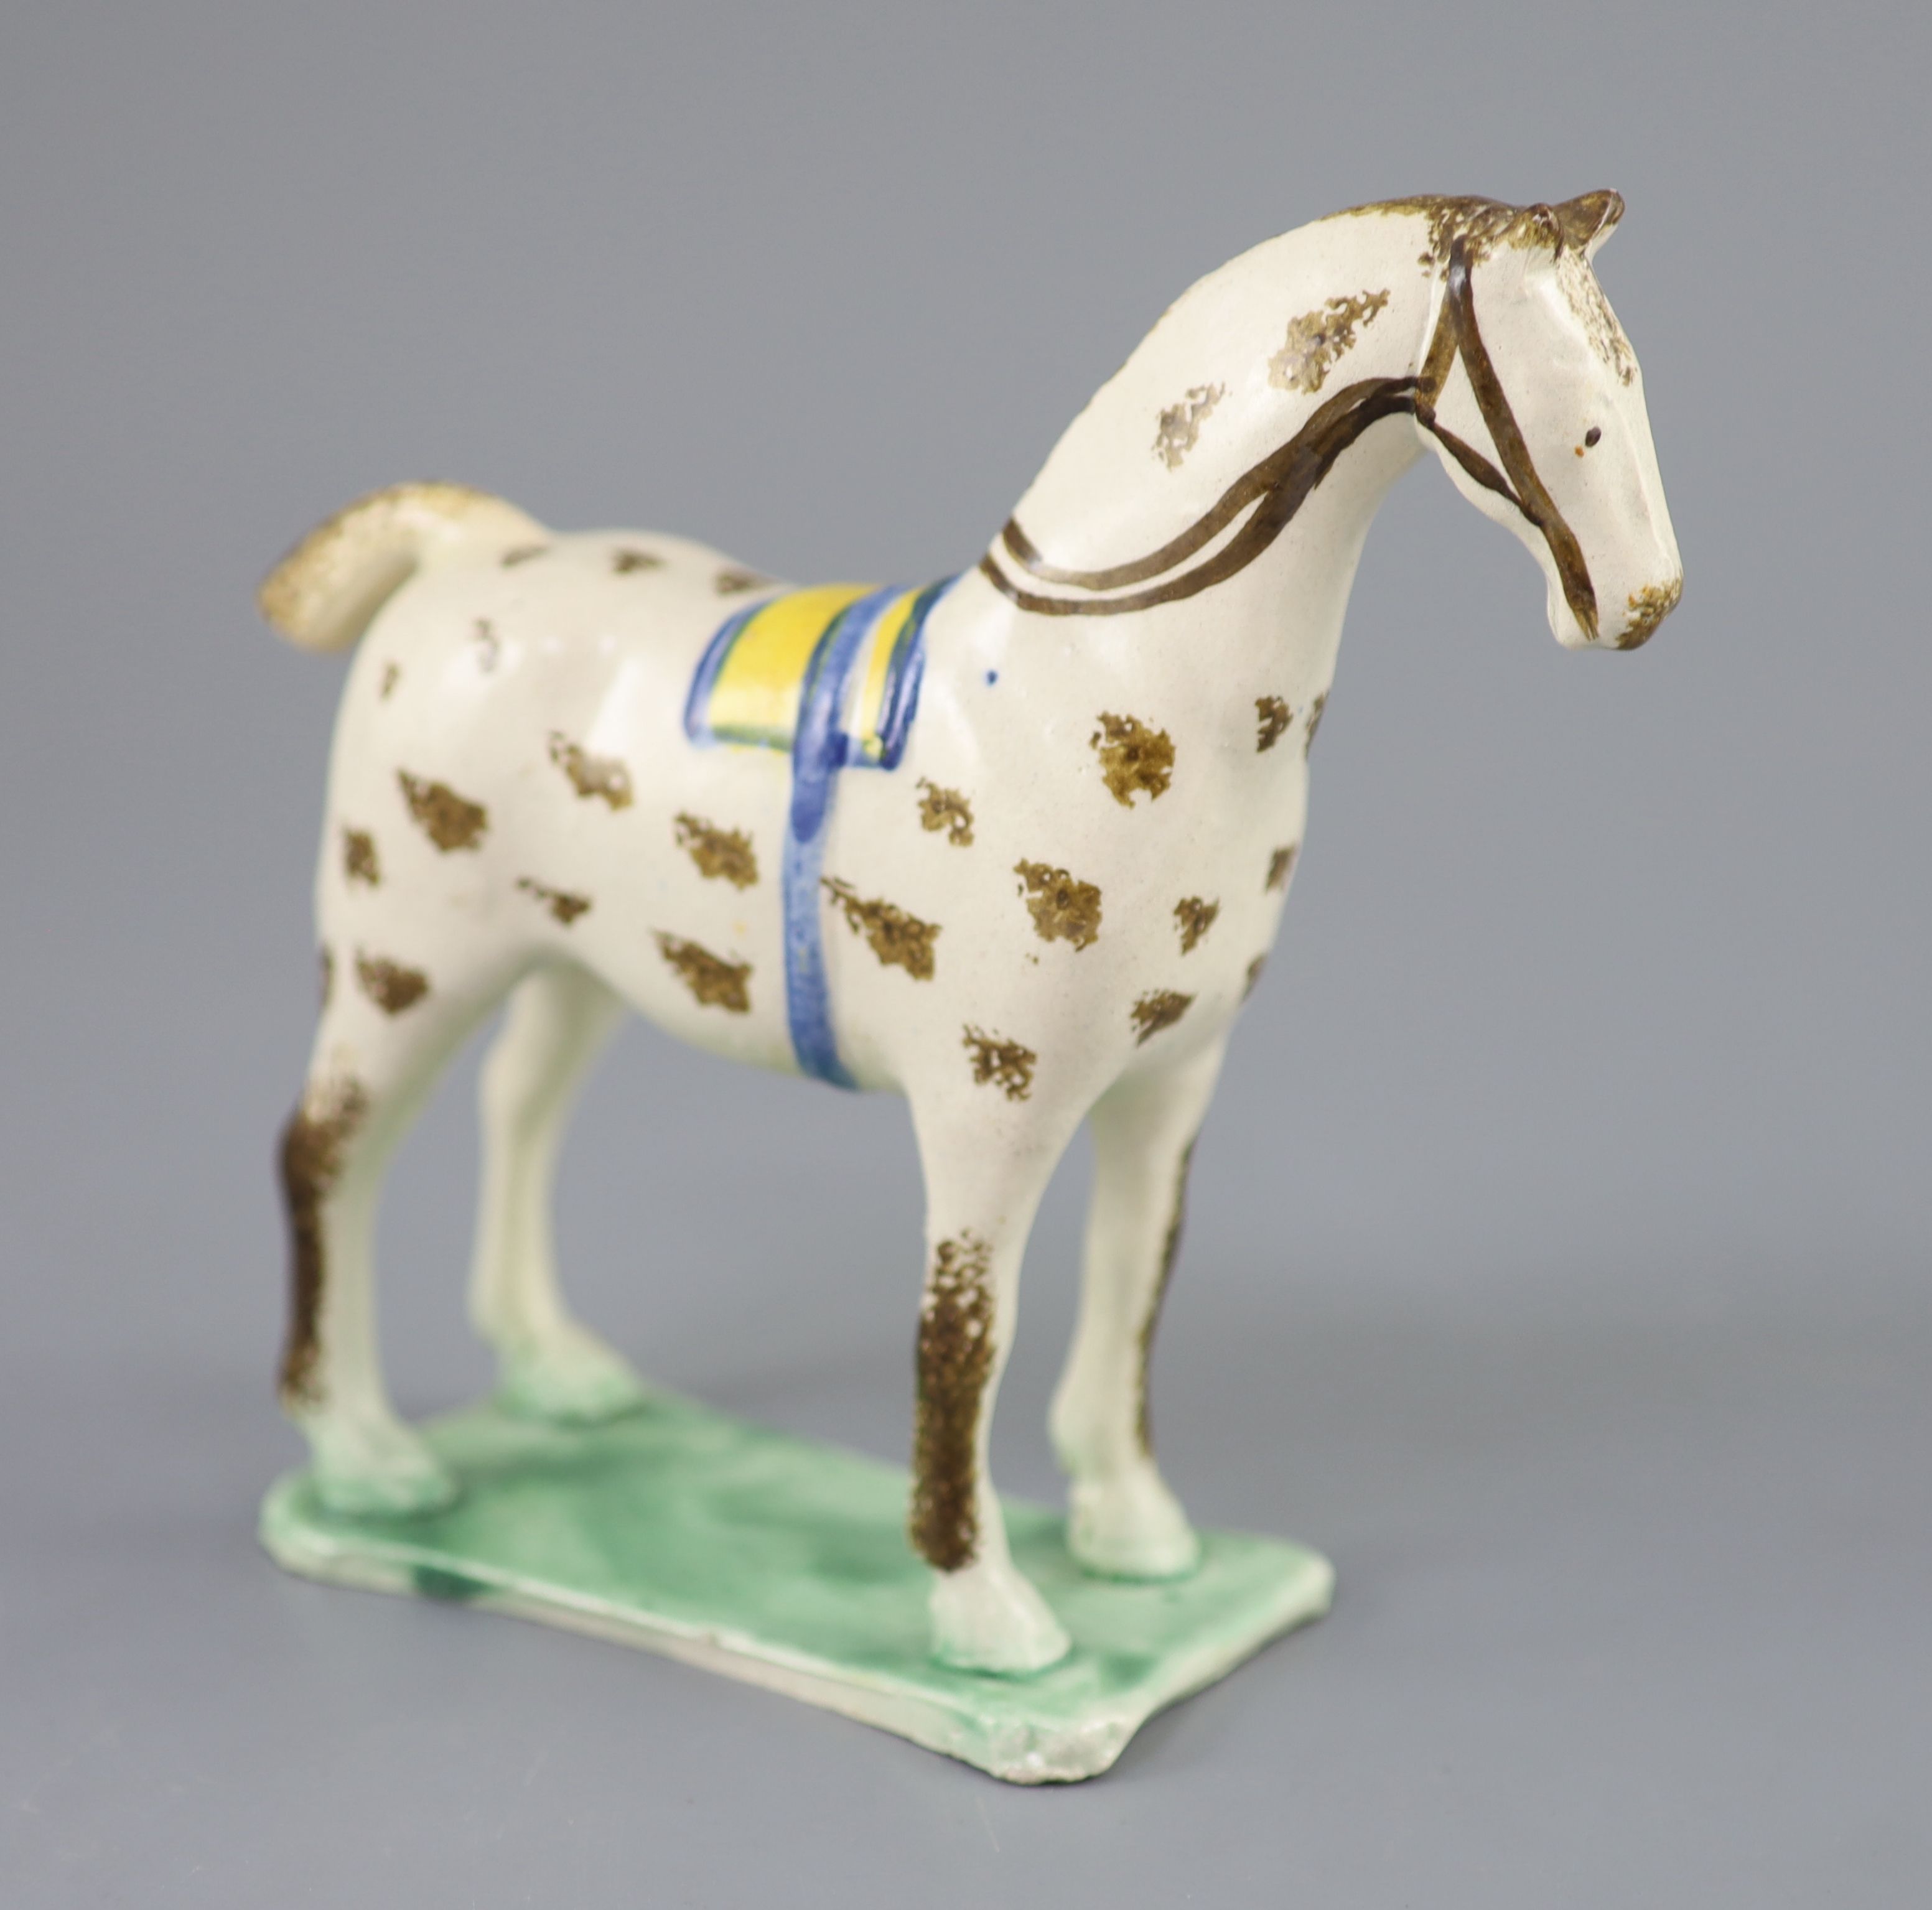 Attributed to St. Anthony Pottery, Newcastle, a pearlware figure of a racehorse with yellow saddle, c.1800-20, 15cm high